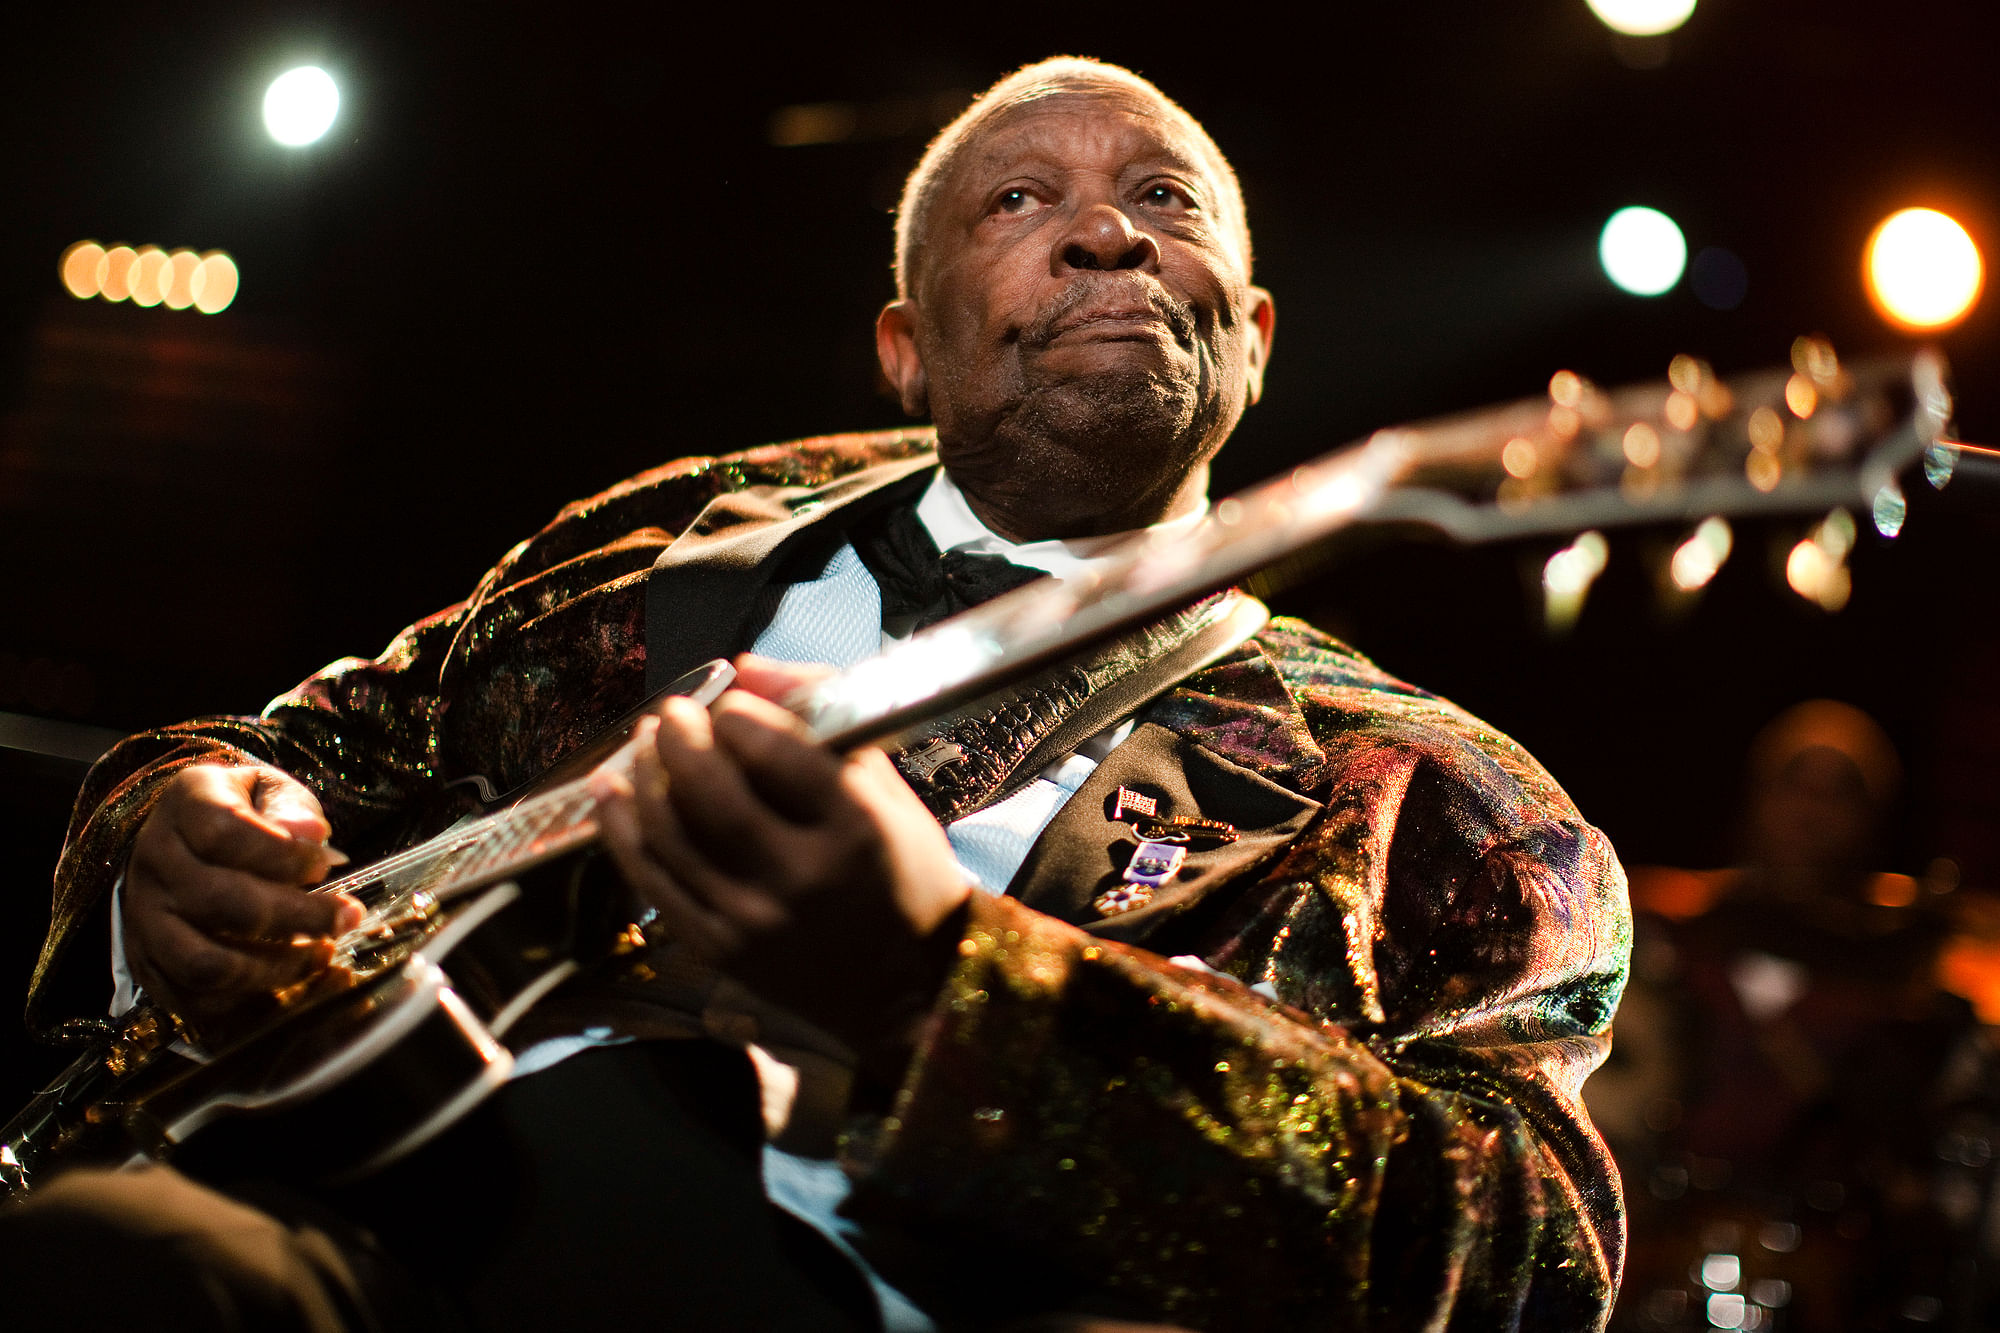 BB King performs at 45th Montreux Jazz Festival, July 2, 2011.&nbsp;